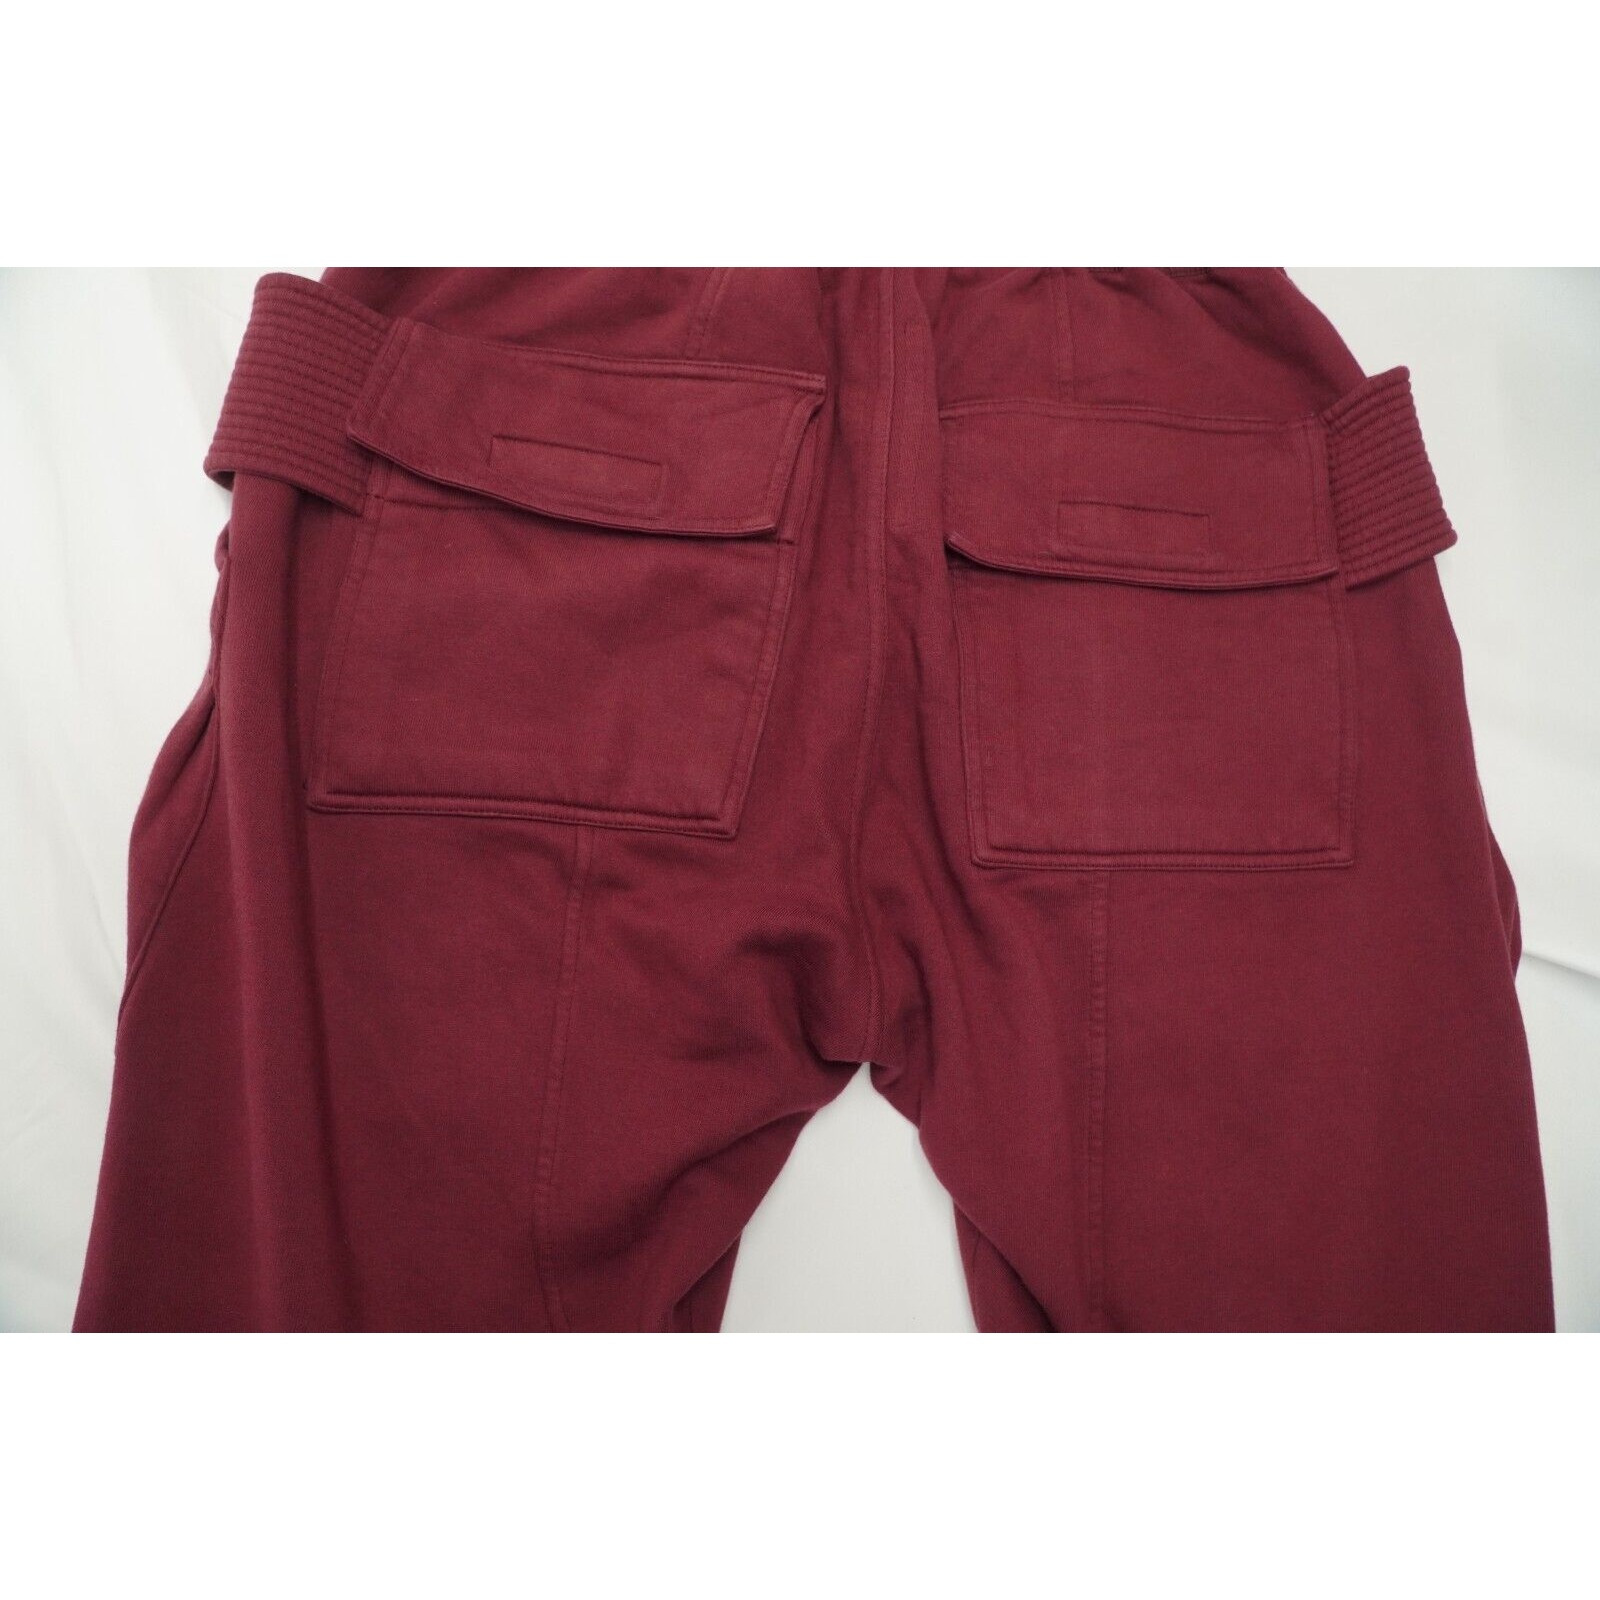 Rick Creatch Cargo Cropped Sweatpant Bruise Red FW20 - 11